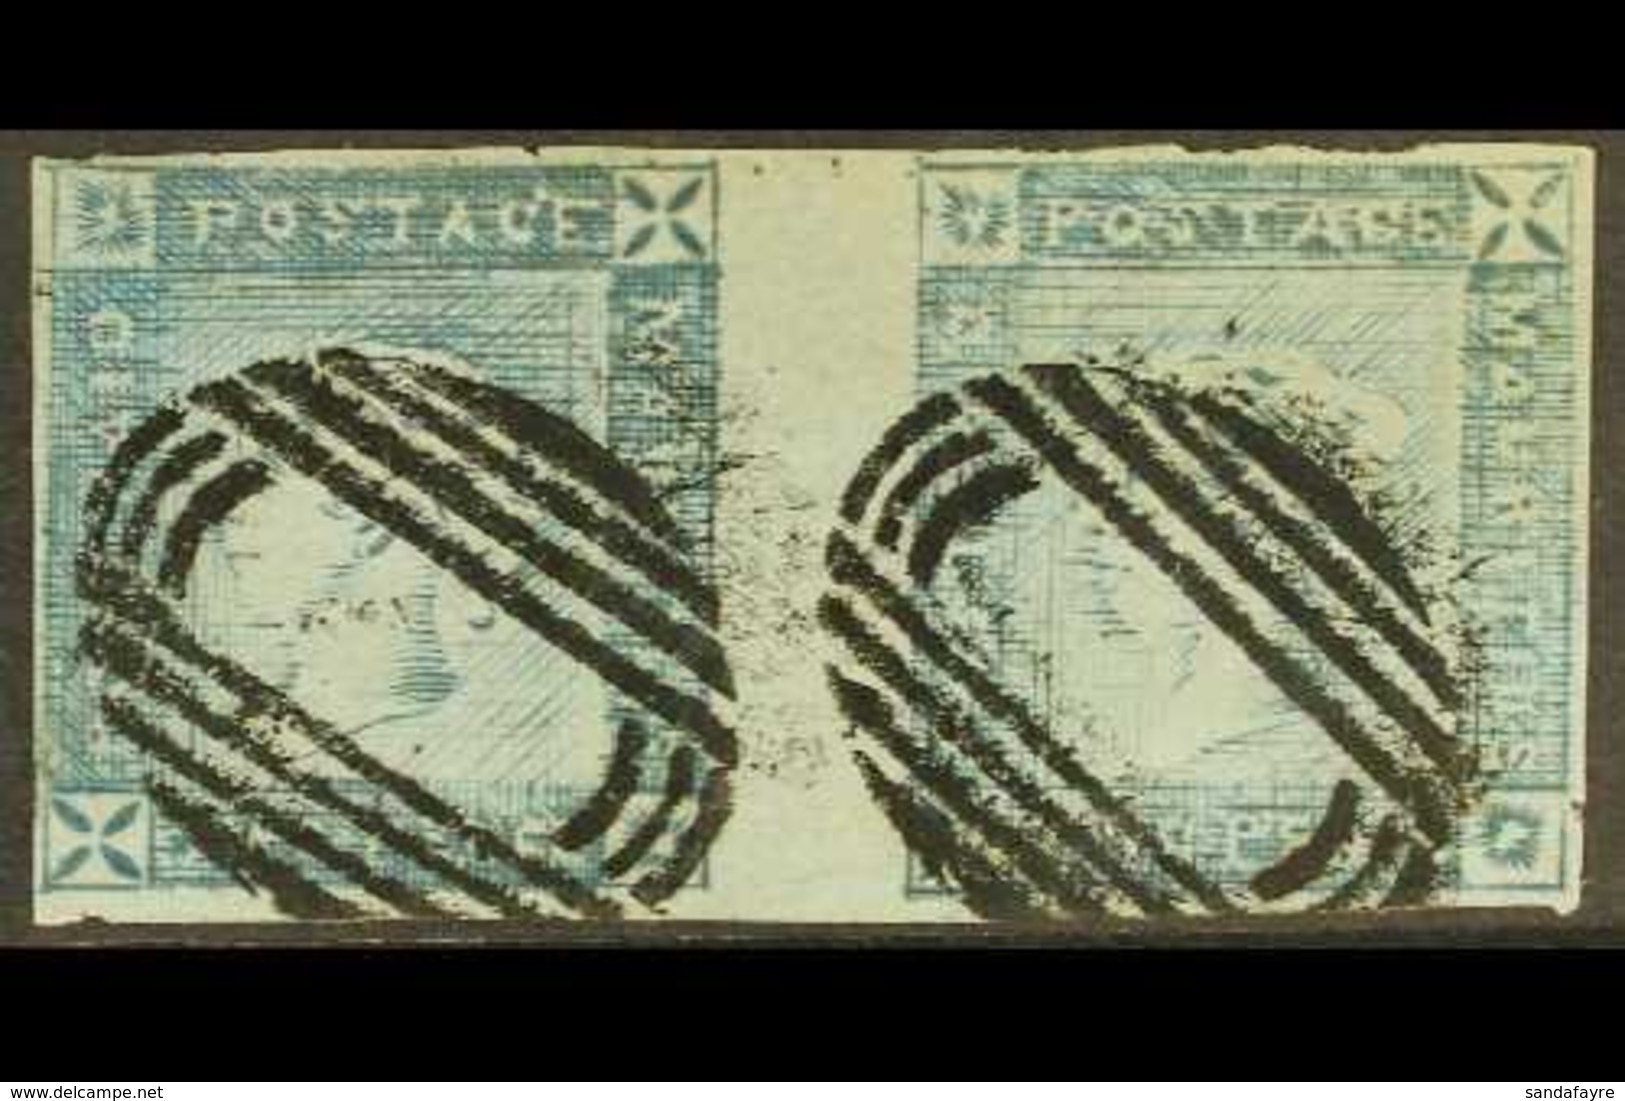 1859 2d Blue "Lapirot" Worn Impression, SG 39, Used HORIZONTAL PAIR From Positions 1 And 2, With 4 Small / Close Margins - Mauritius (...-1967)